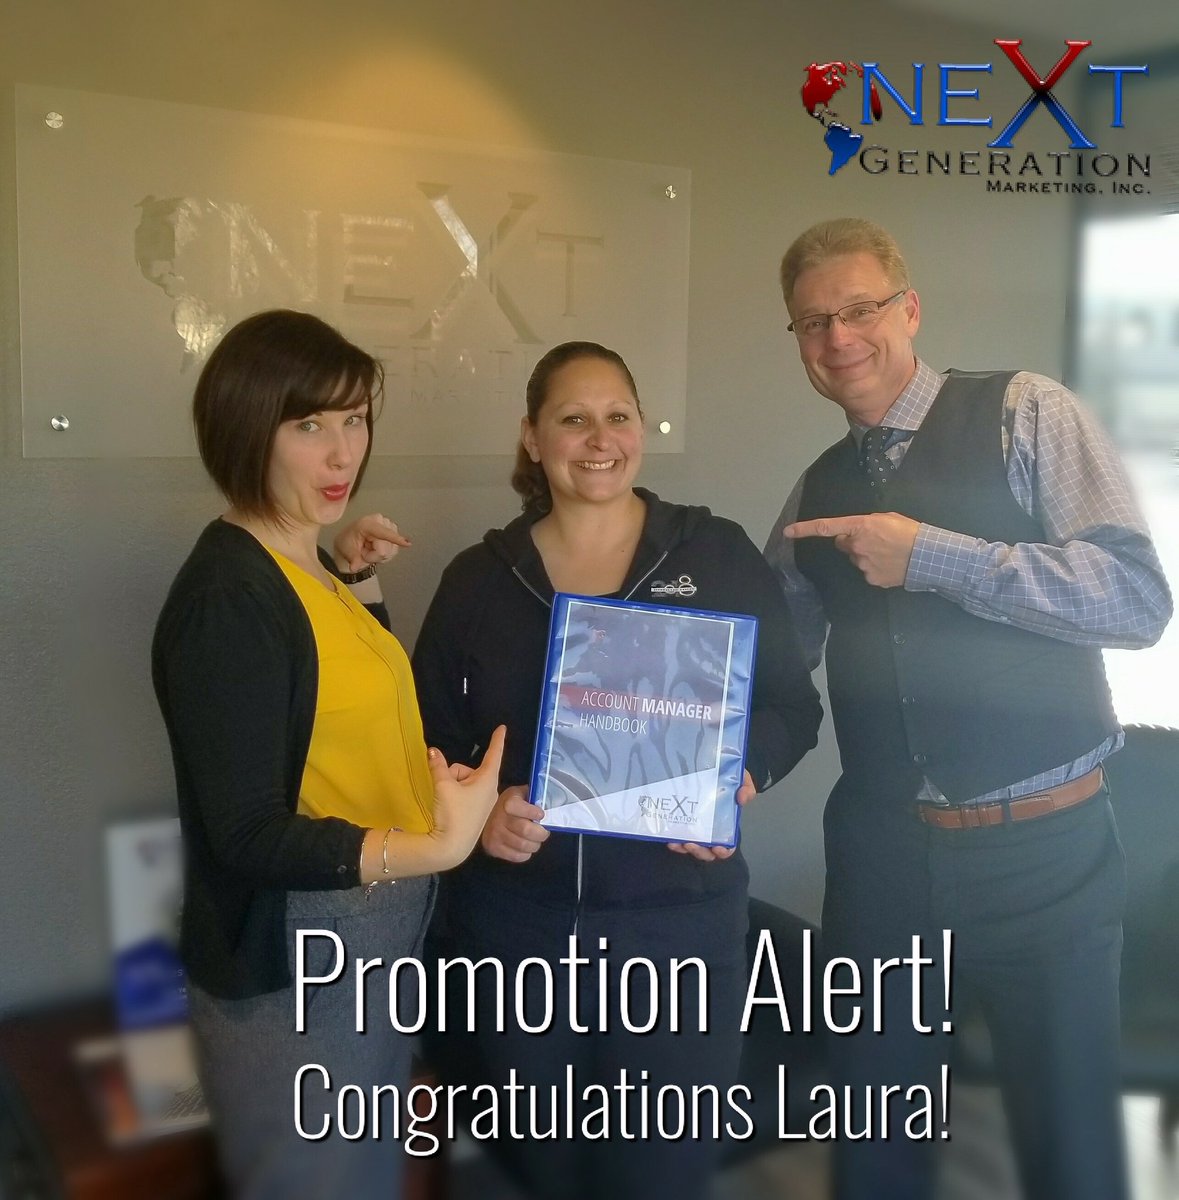 Congratulations to Laura! You have worked incredibly hard and have exceeded all expectation and took your education of our company into your own hands and have promoted yourself into our newest Account Manager!
#PoweringtheNGMGrowthin2018 #PromotionAlert  #NGMLeadership